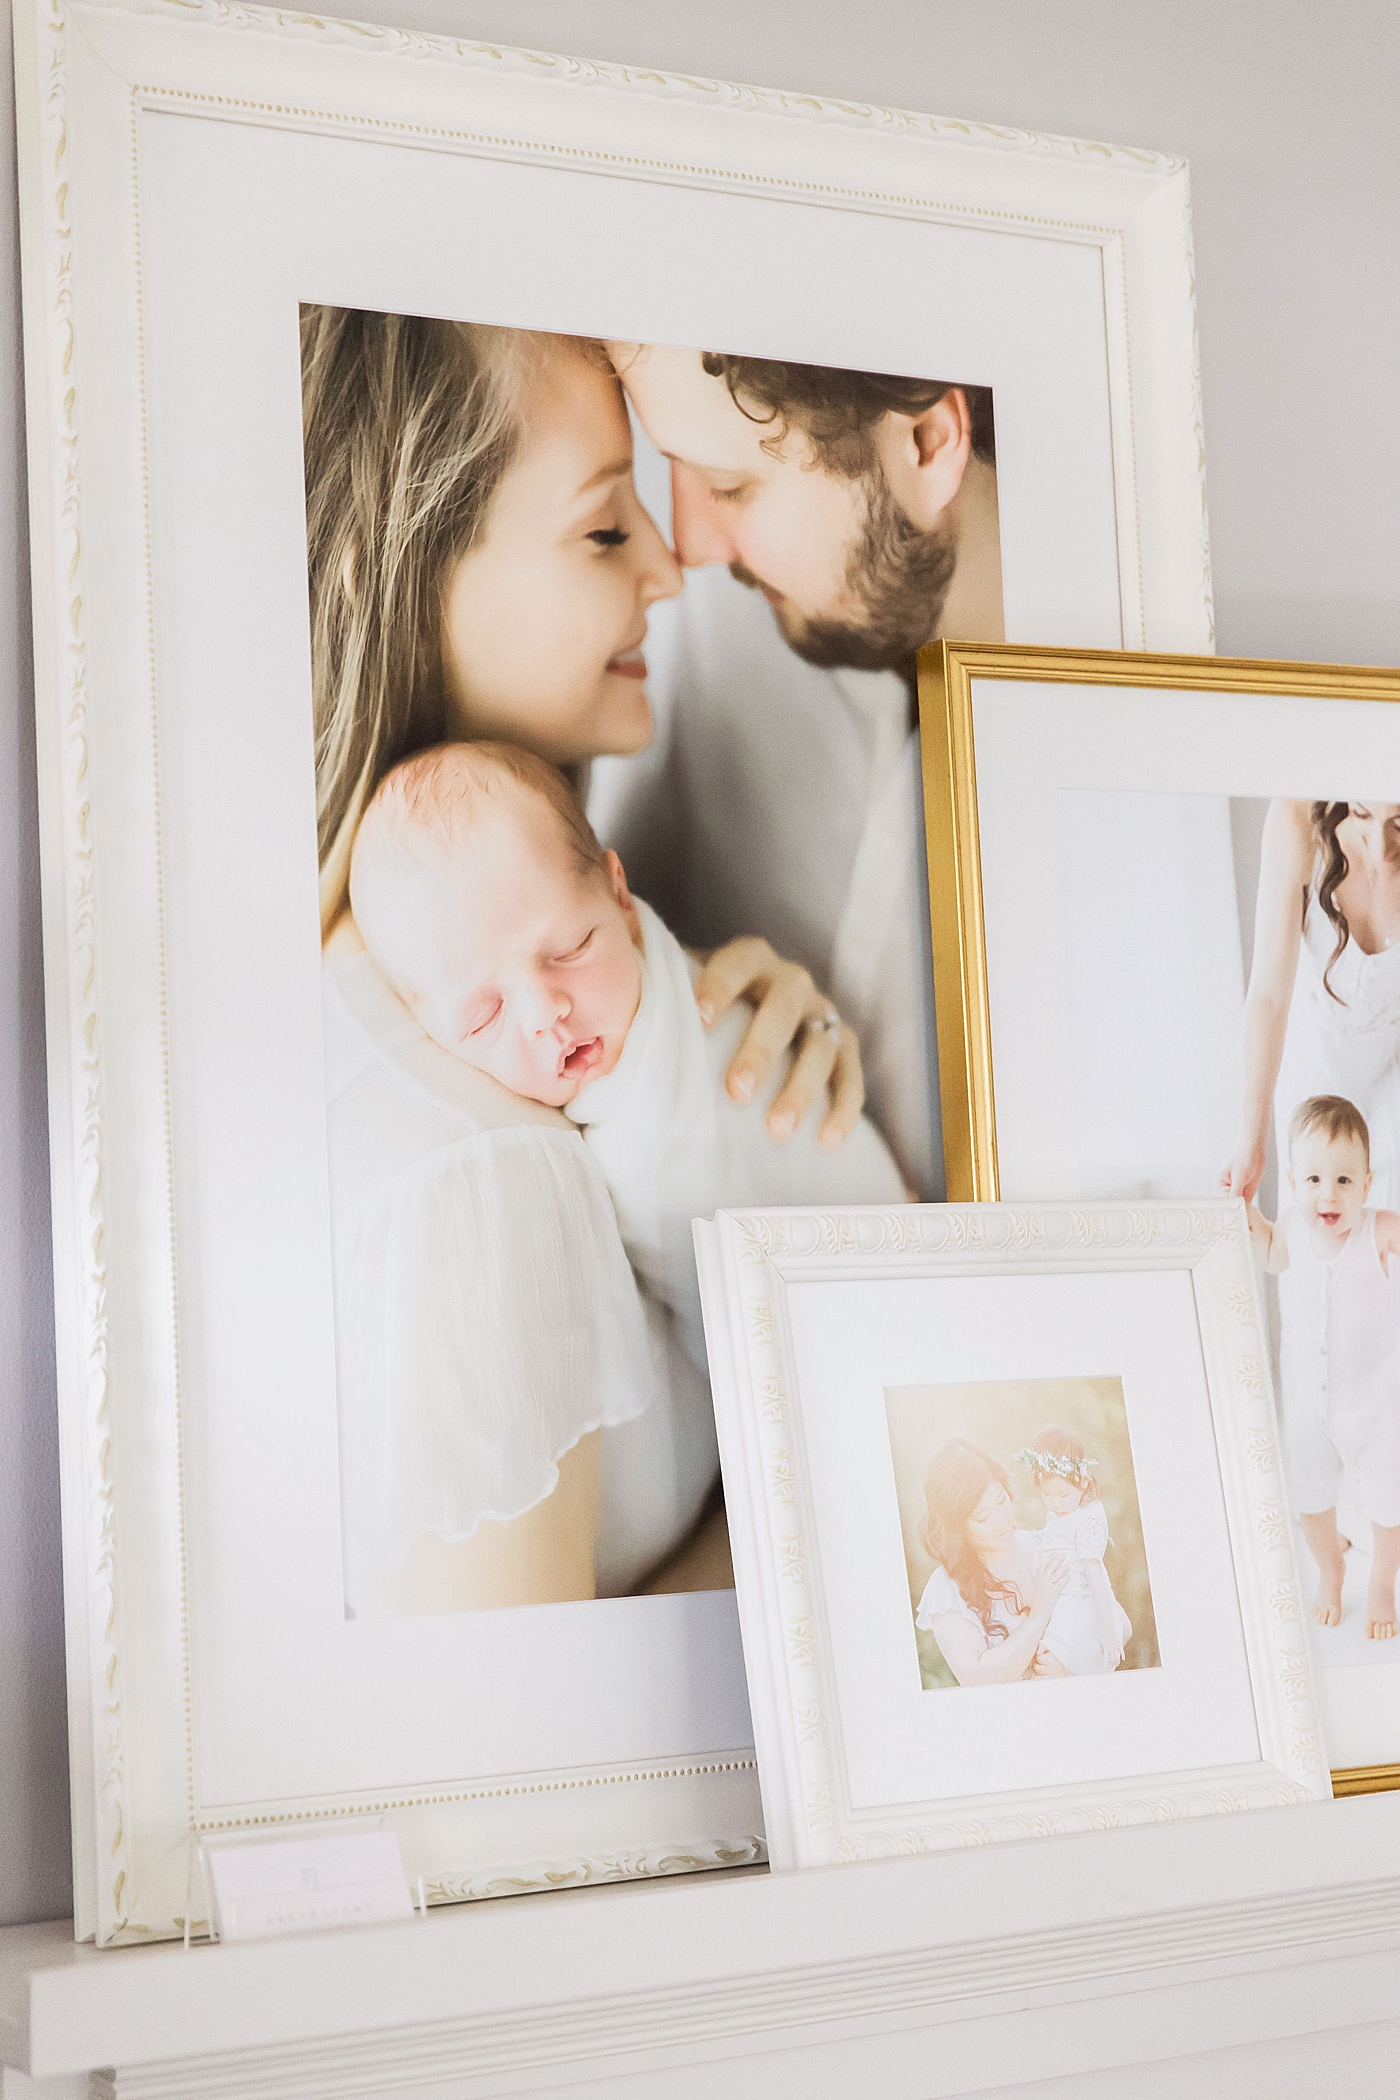 Custom framing and planning your session with Houston Newborn and Family Photographer, Fresh Light Photography.